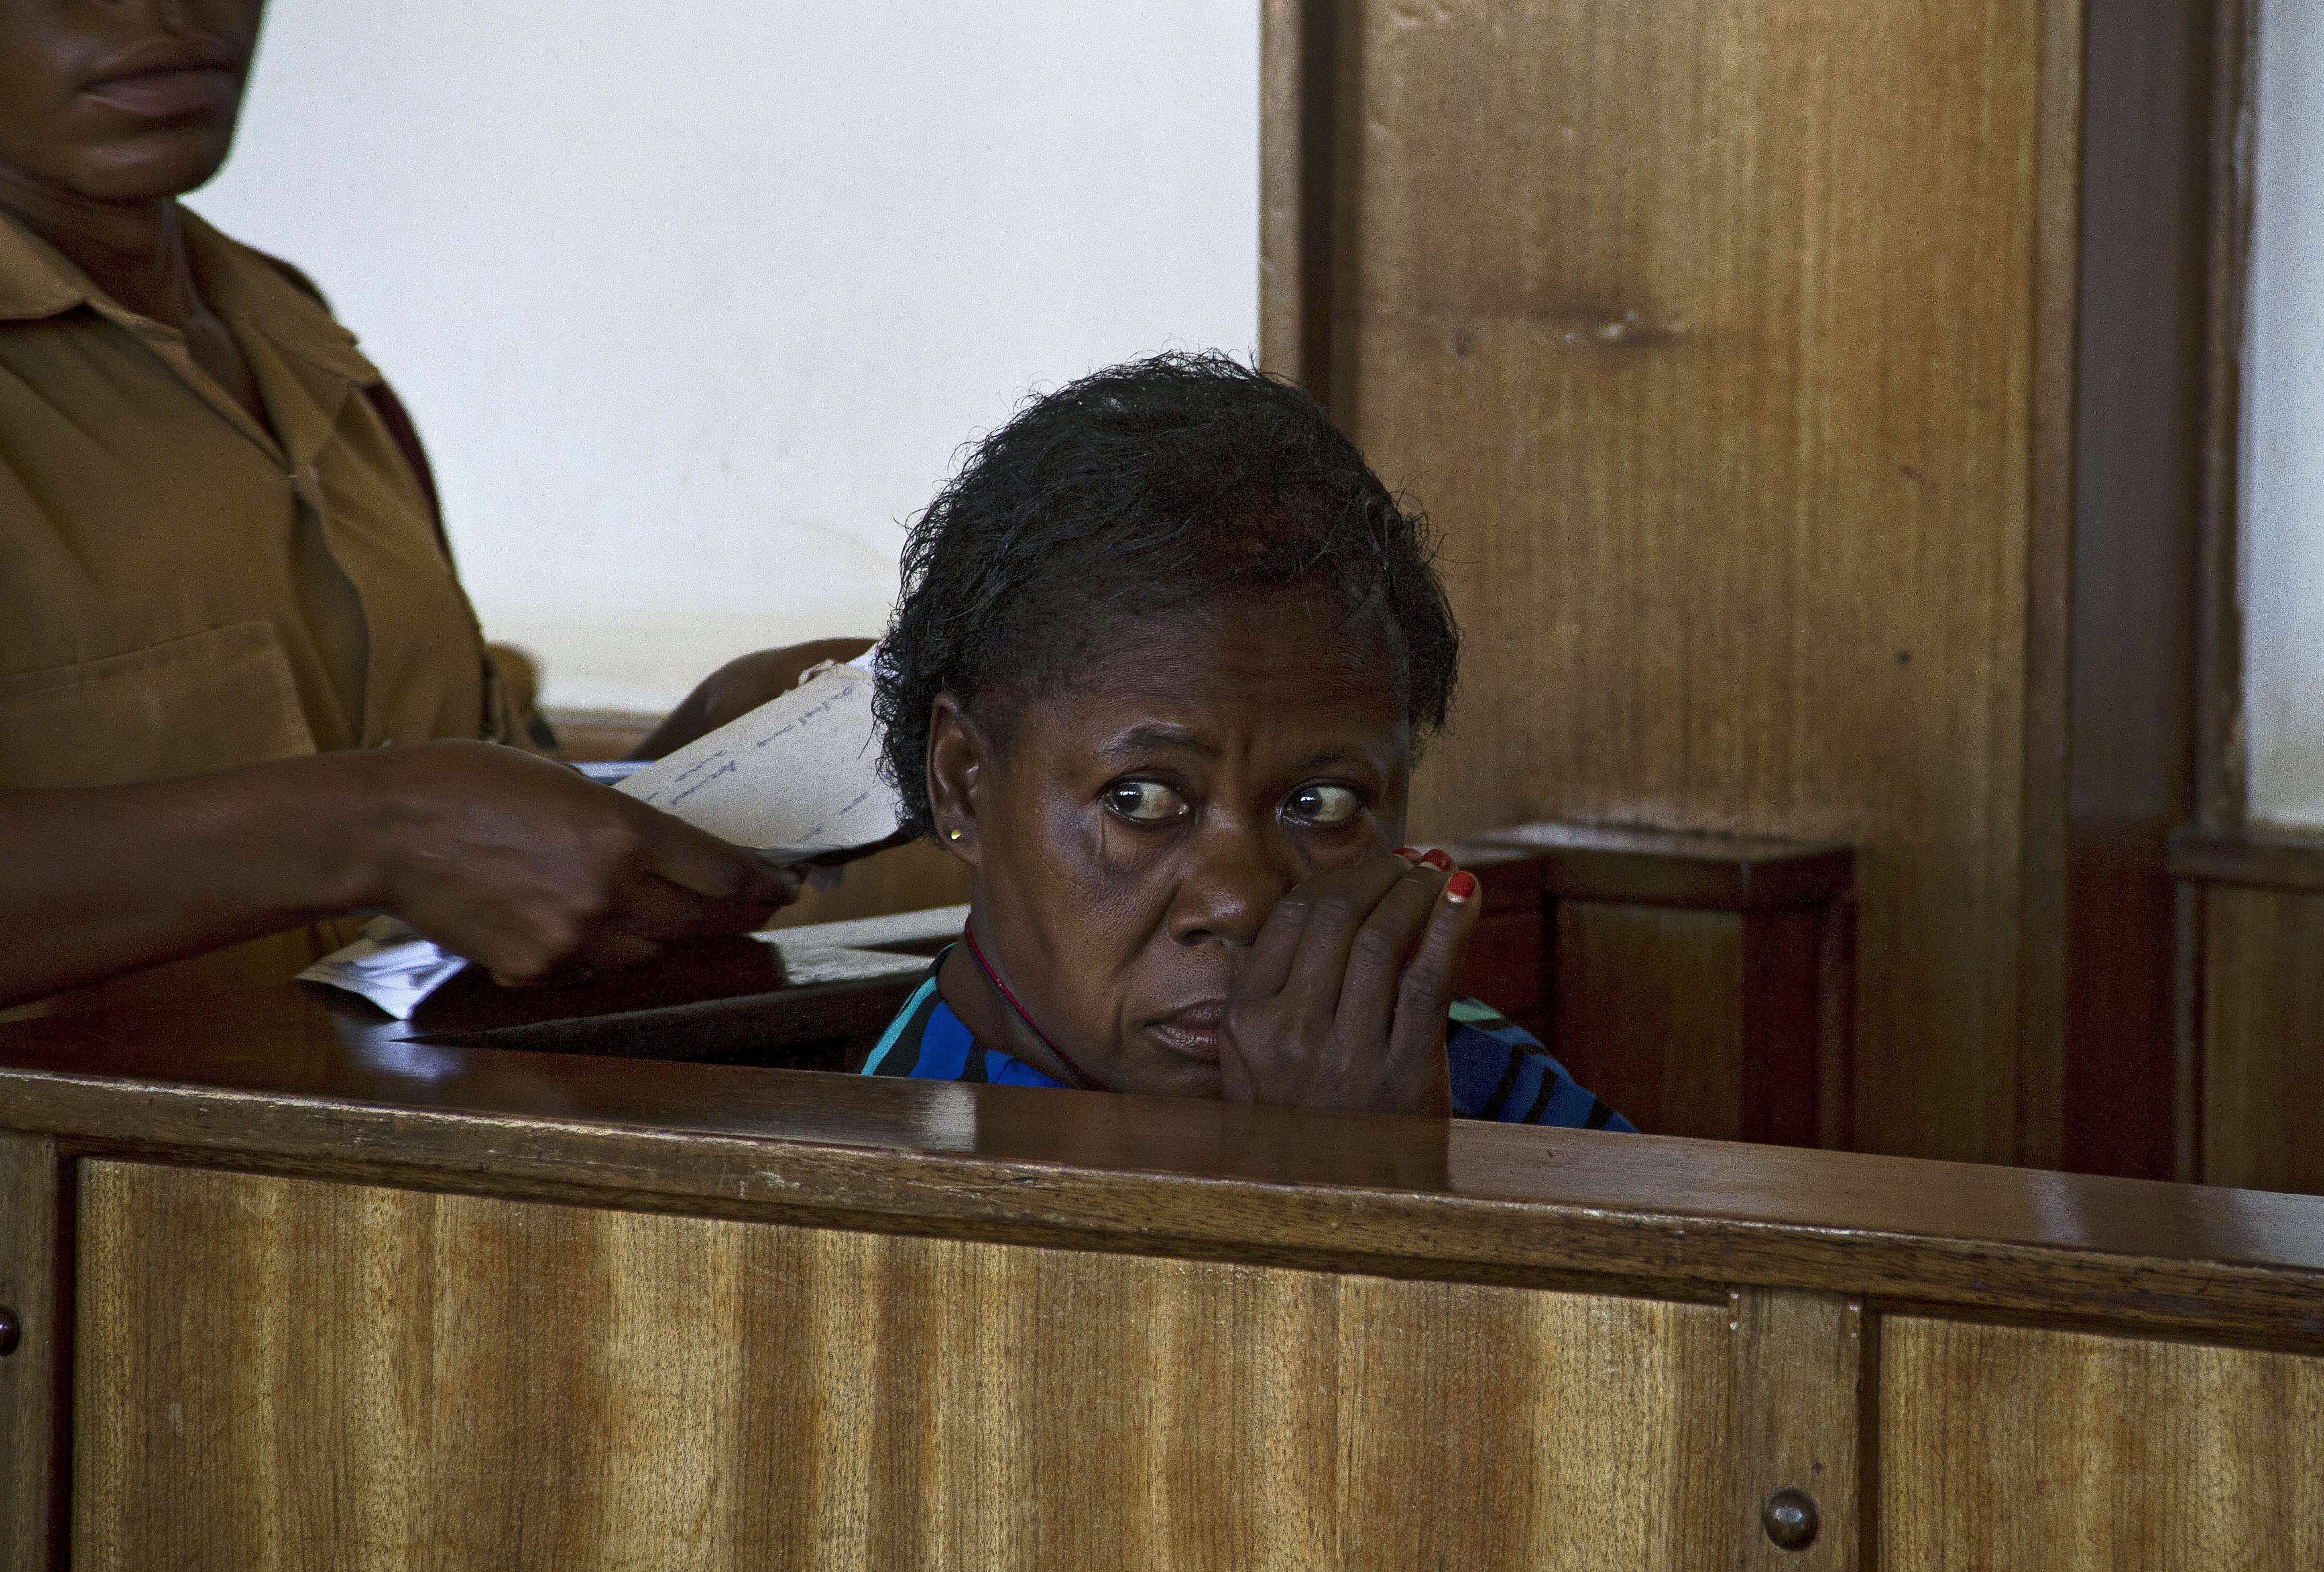 Ugandan nurse Rosemary Namubiru sits at the dock at the Buganda Road Magistrates Court on May 19, 2014 in Kampala during a ruling on a case where she was charged with "Criminal Negligence" and sentenced to 3 years in prison after she was found guilty by the Ugandan court. (Isaax Kasamni—AFP/Getty Images)